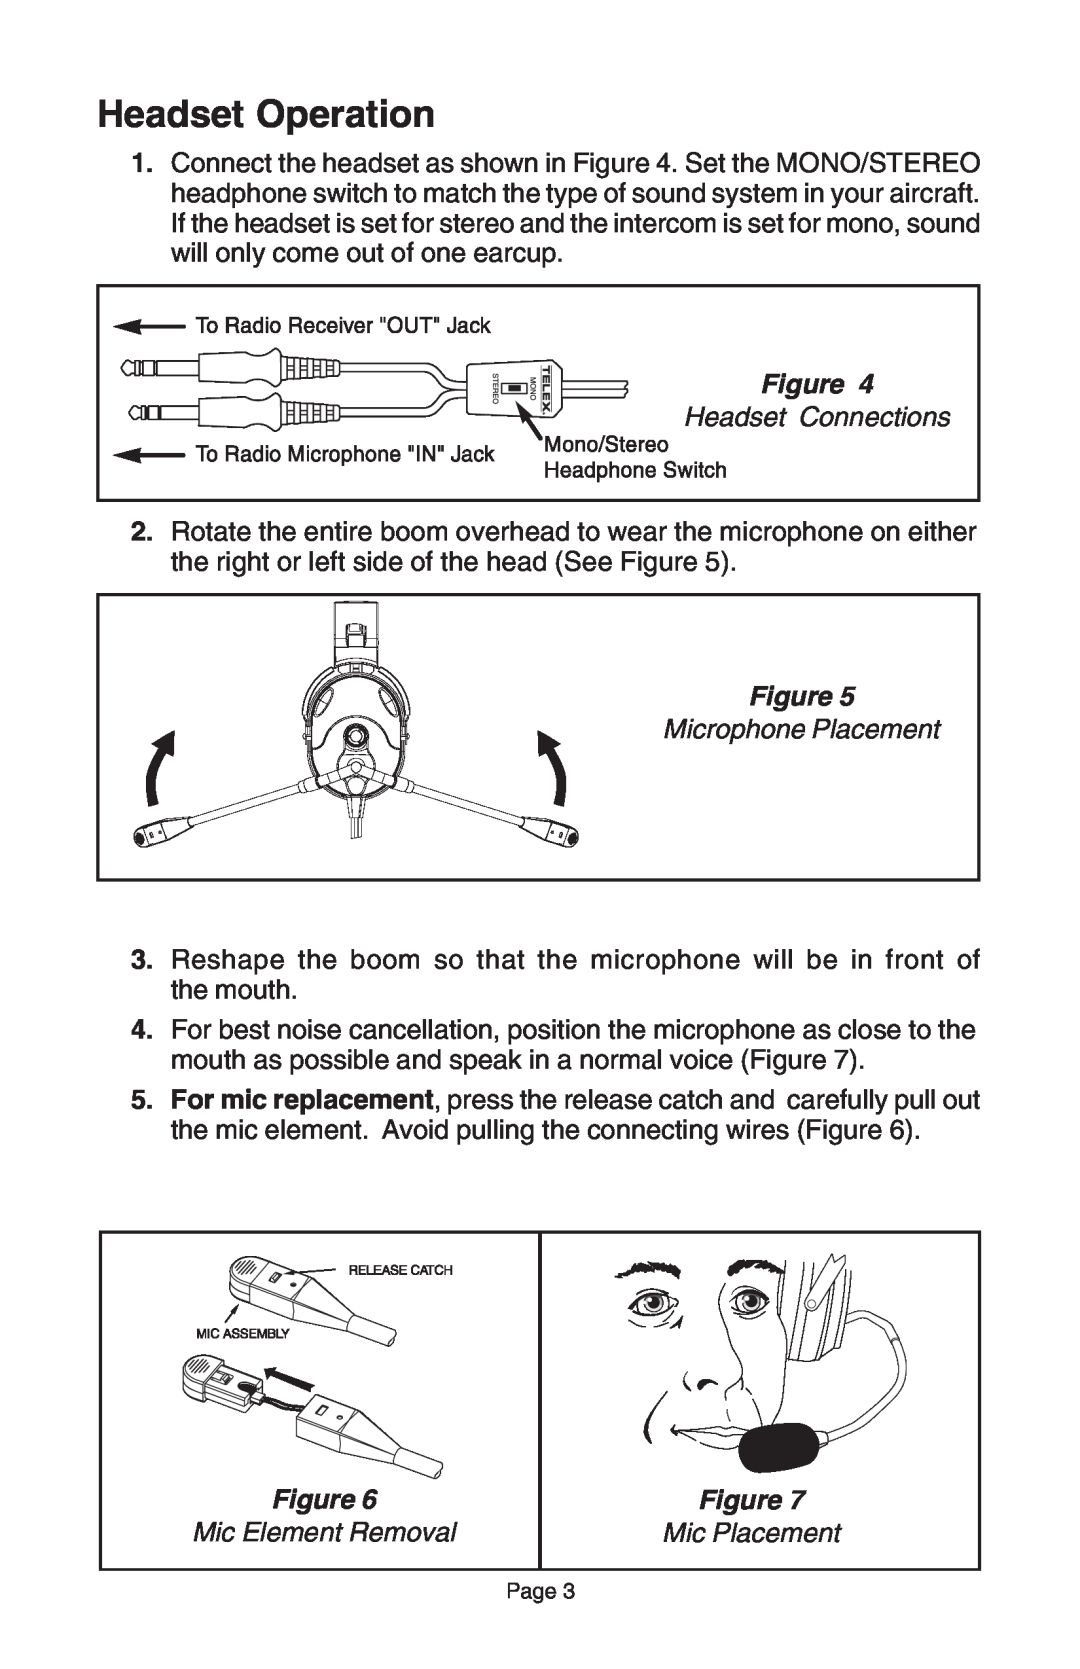 Telex 50-D manual Headset Operation, Headset Connections, Microphone Placement, Mic Element Removal, Mic Placement 